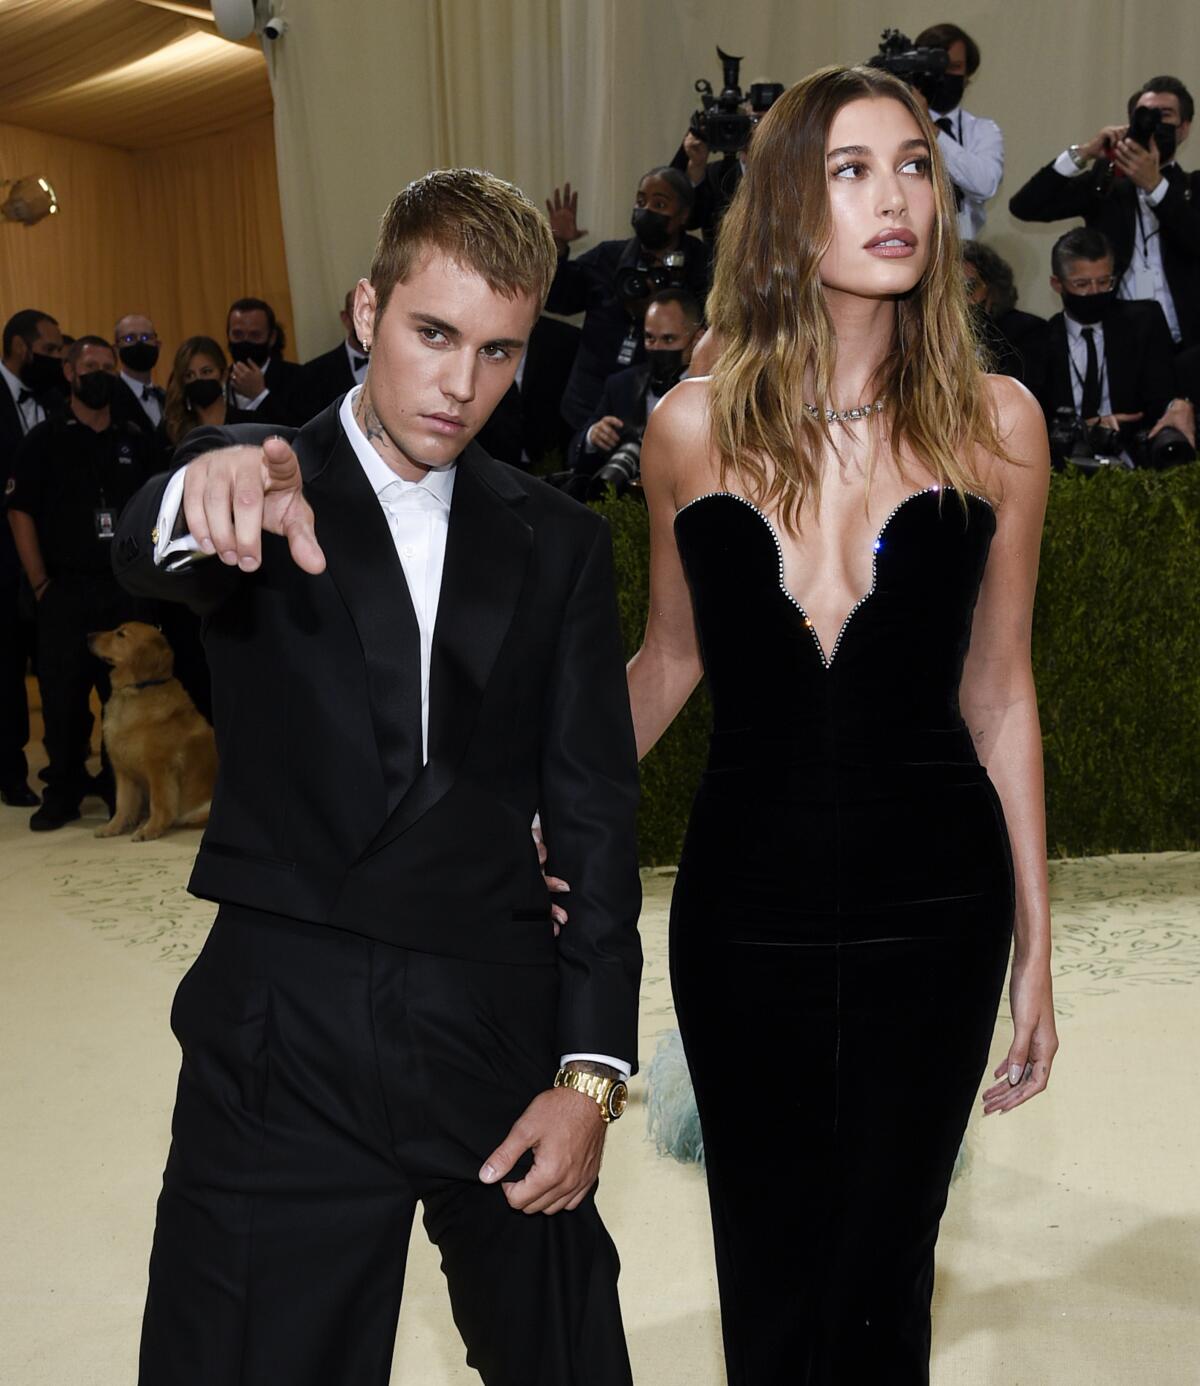 Justin Bieber in a baggy black suit points at the camera while standing next to Hailey Bieber in a black strapless gown